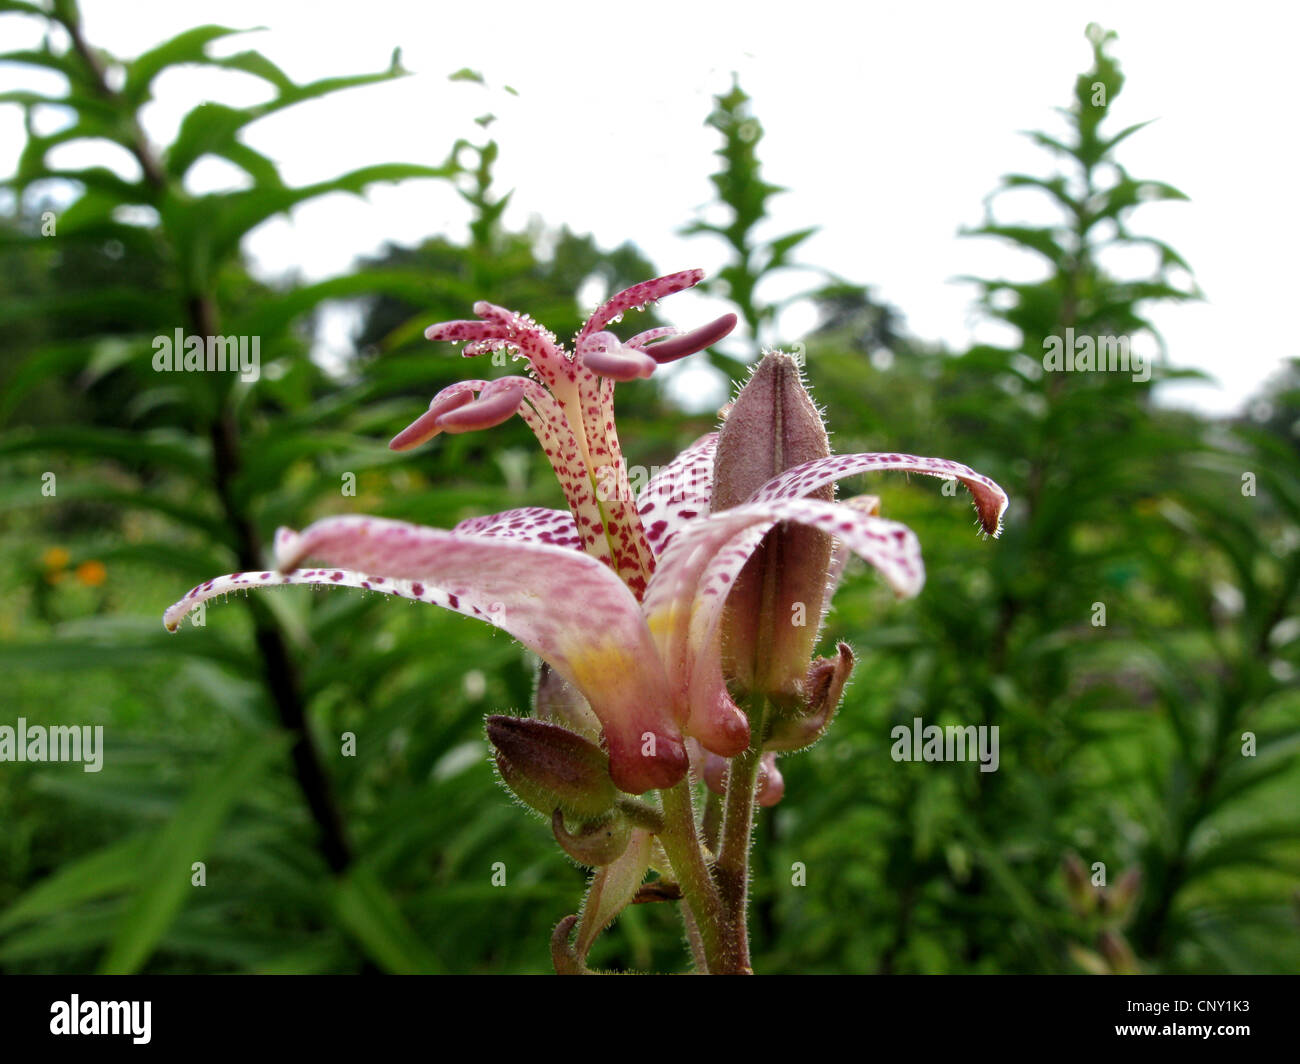 toad lily (Tricyrtis hirta, Tricyrtis japonica), flower Stock Photo